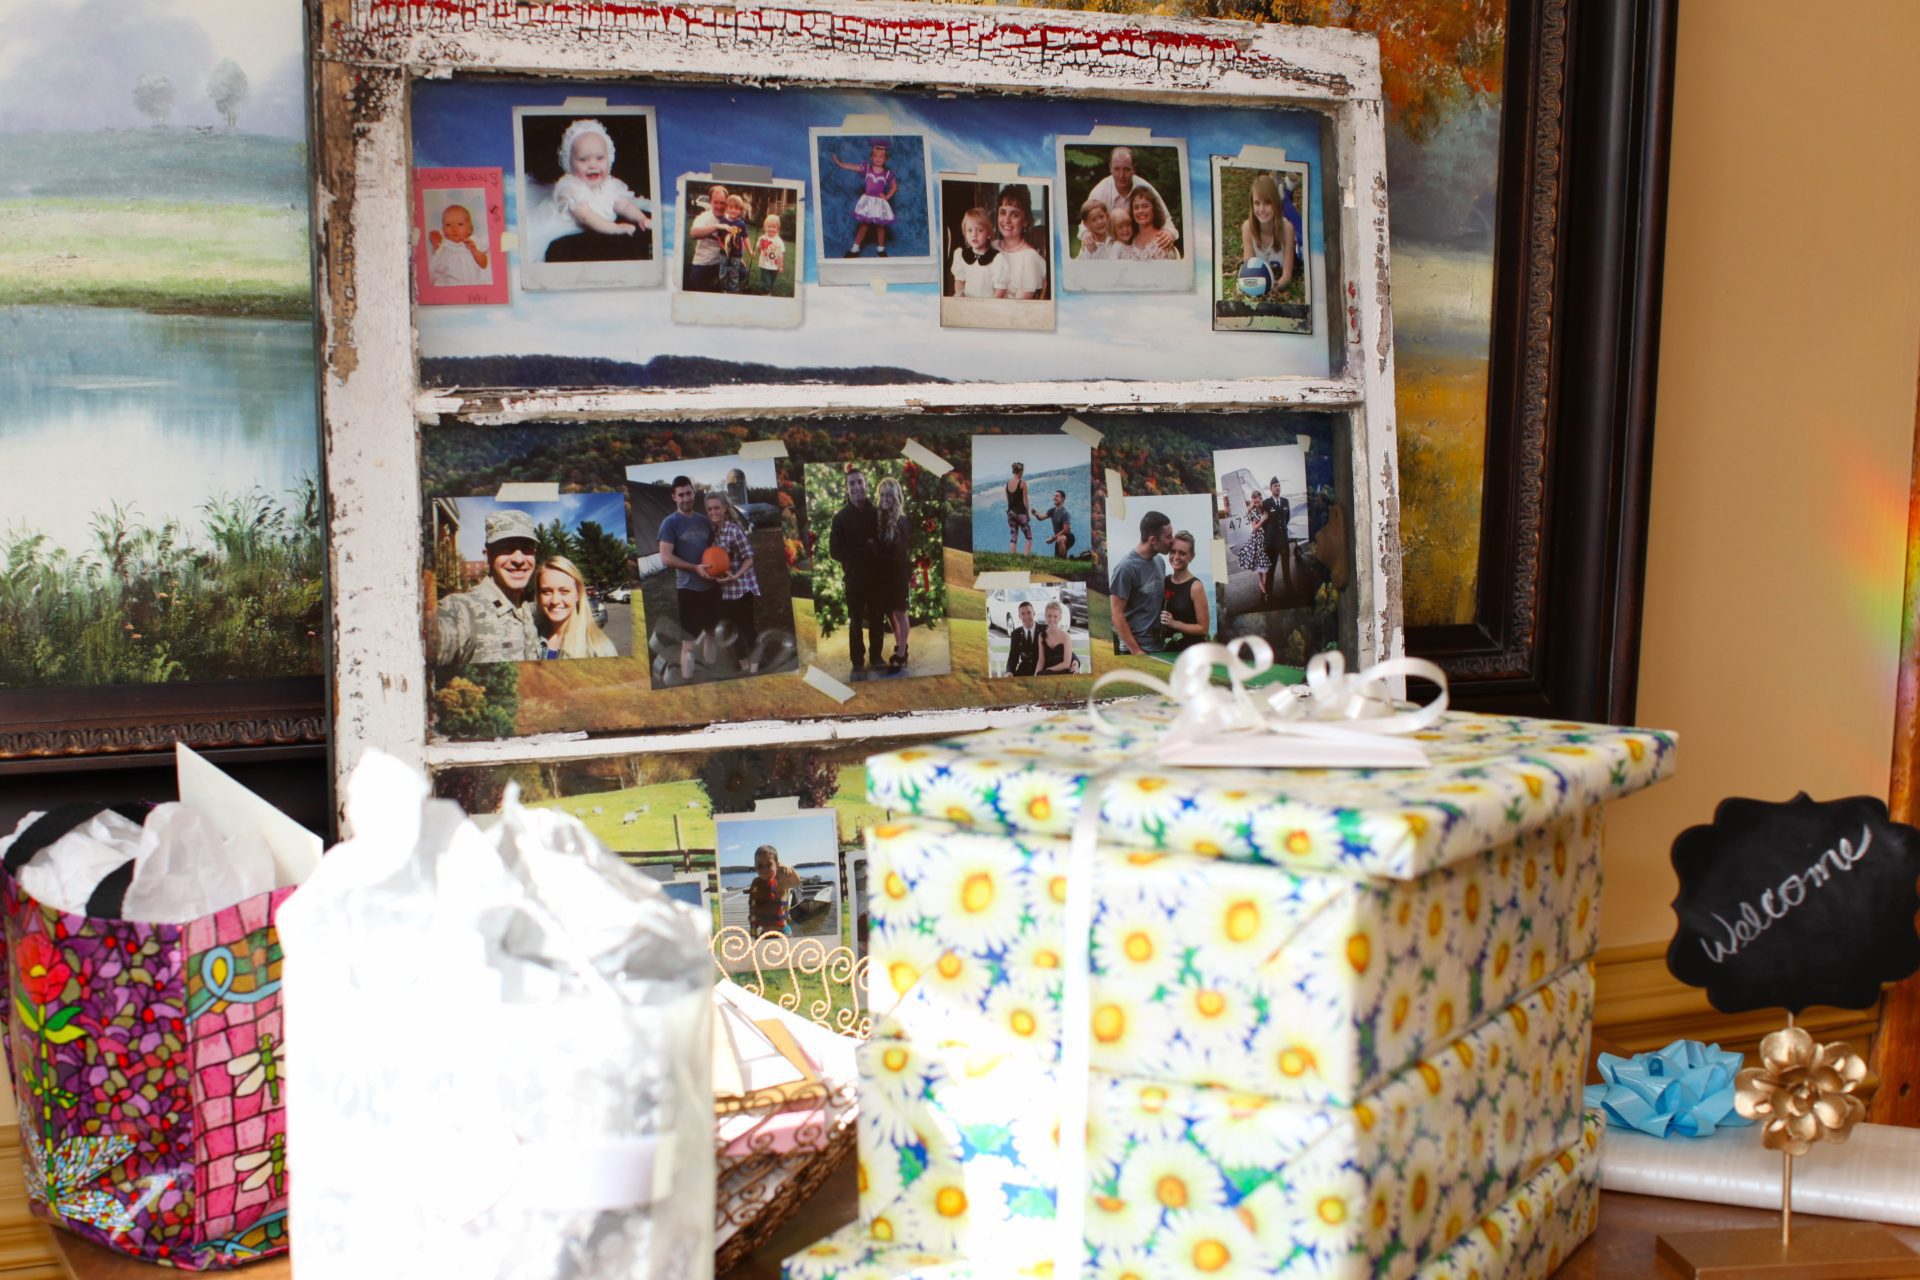 tea party theme wedding rustic window frame with photos of bride and groom